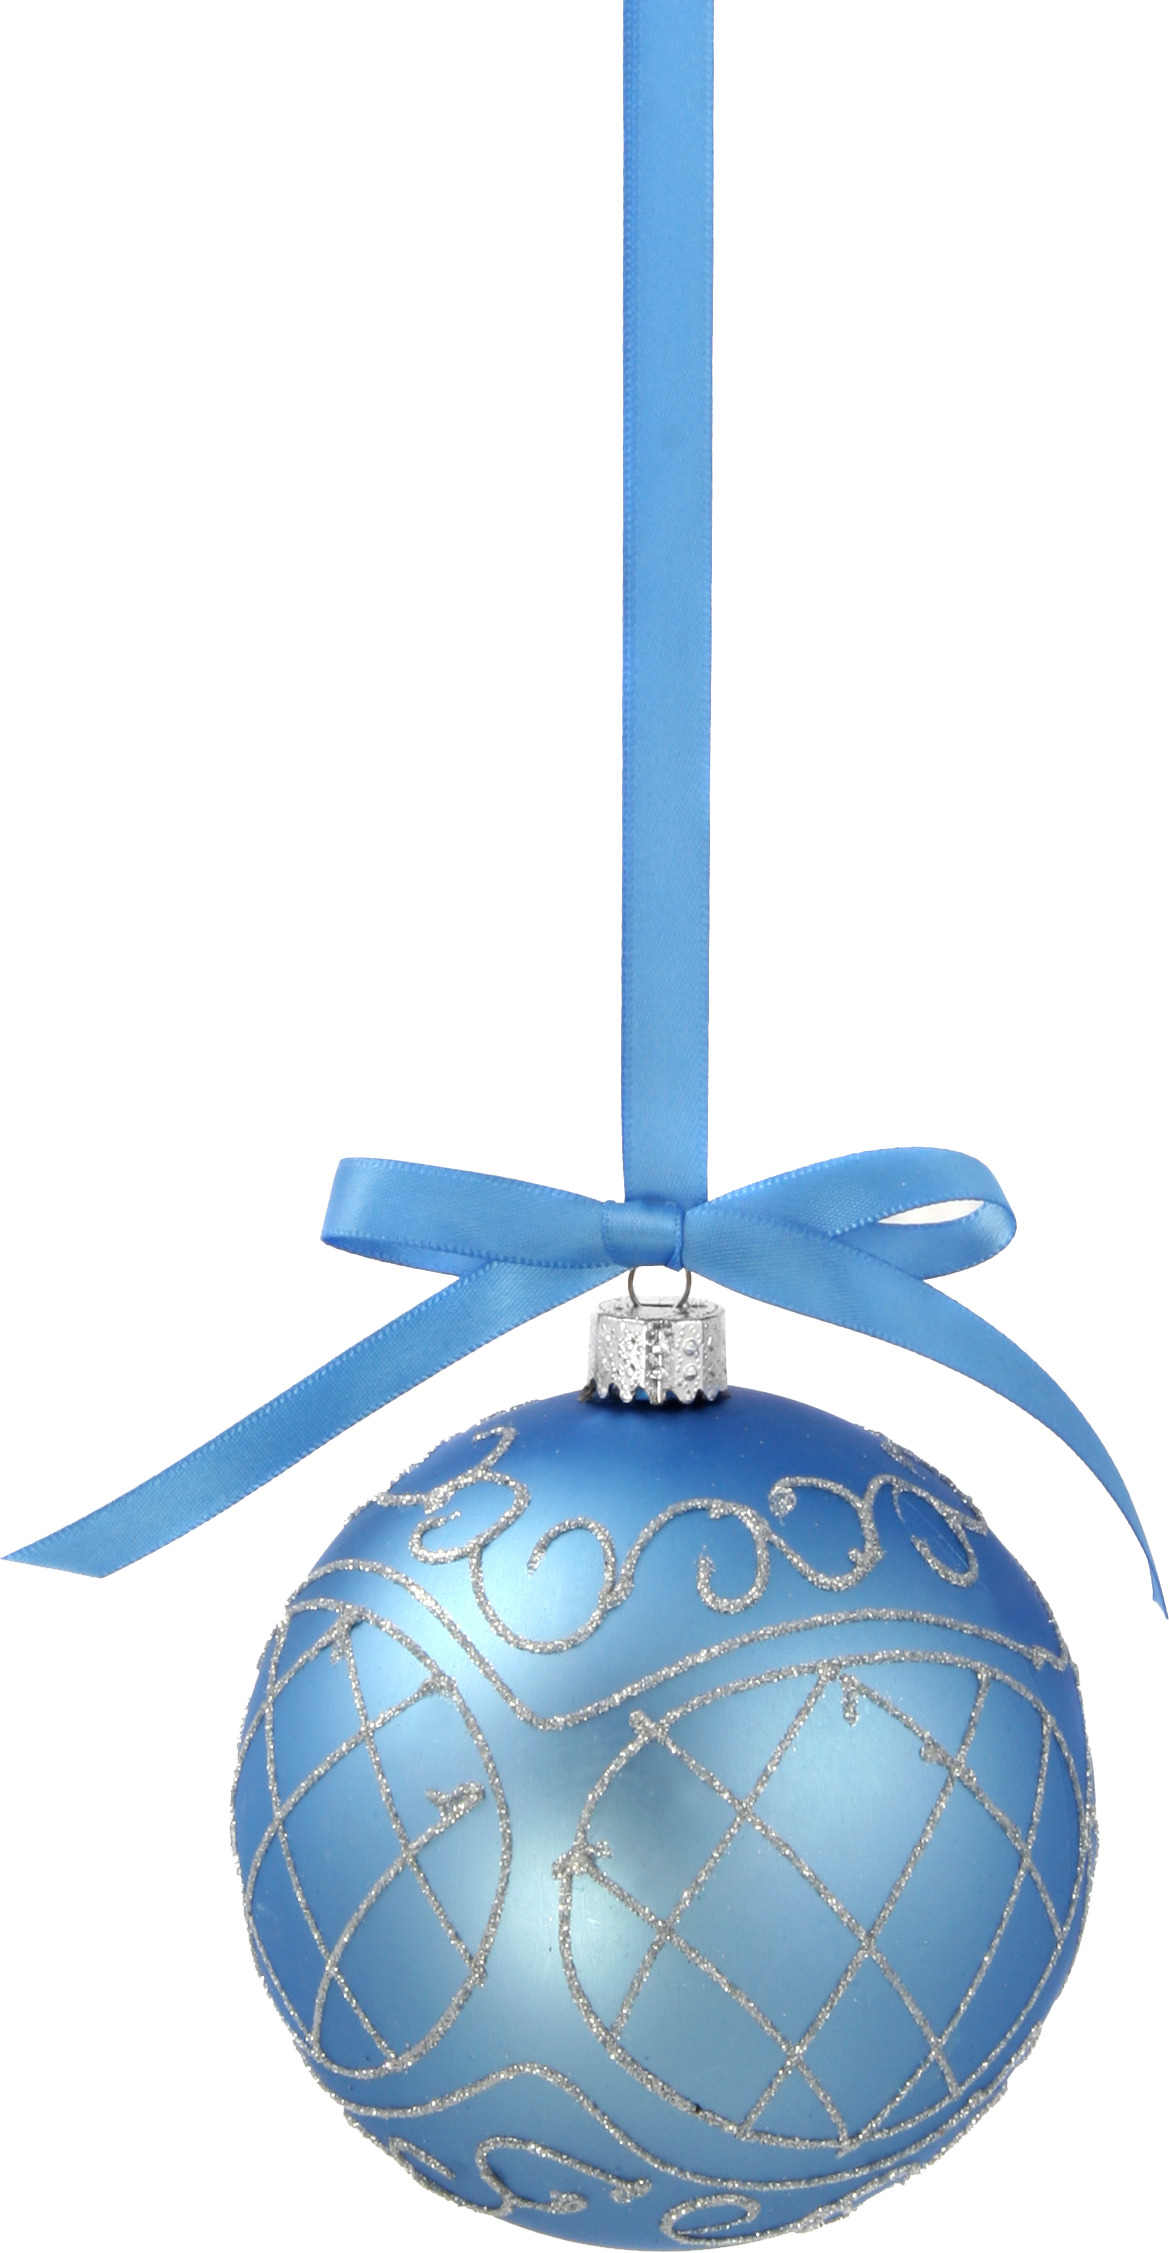 ornament clipart turquoise